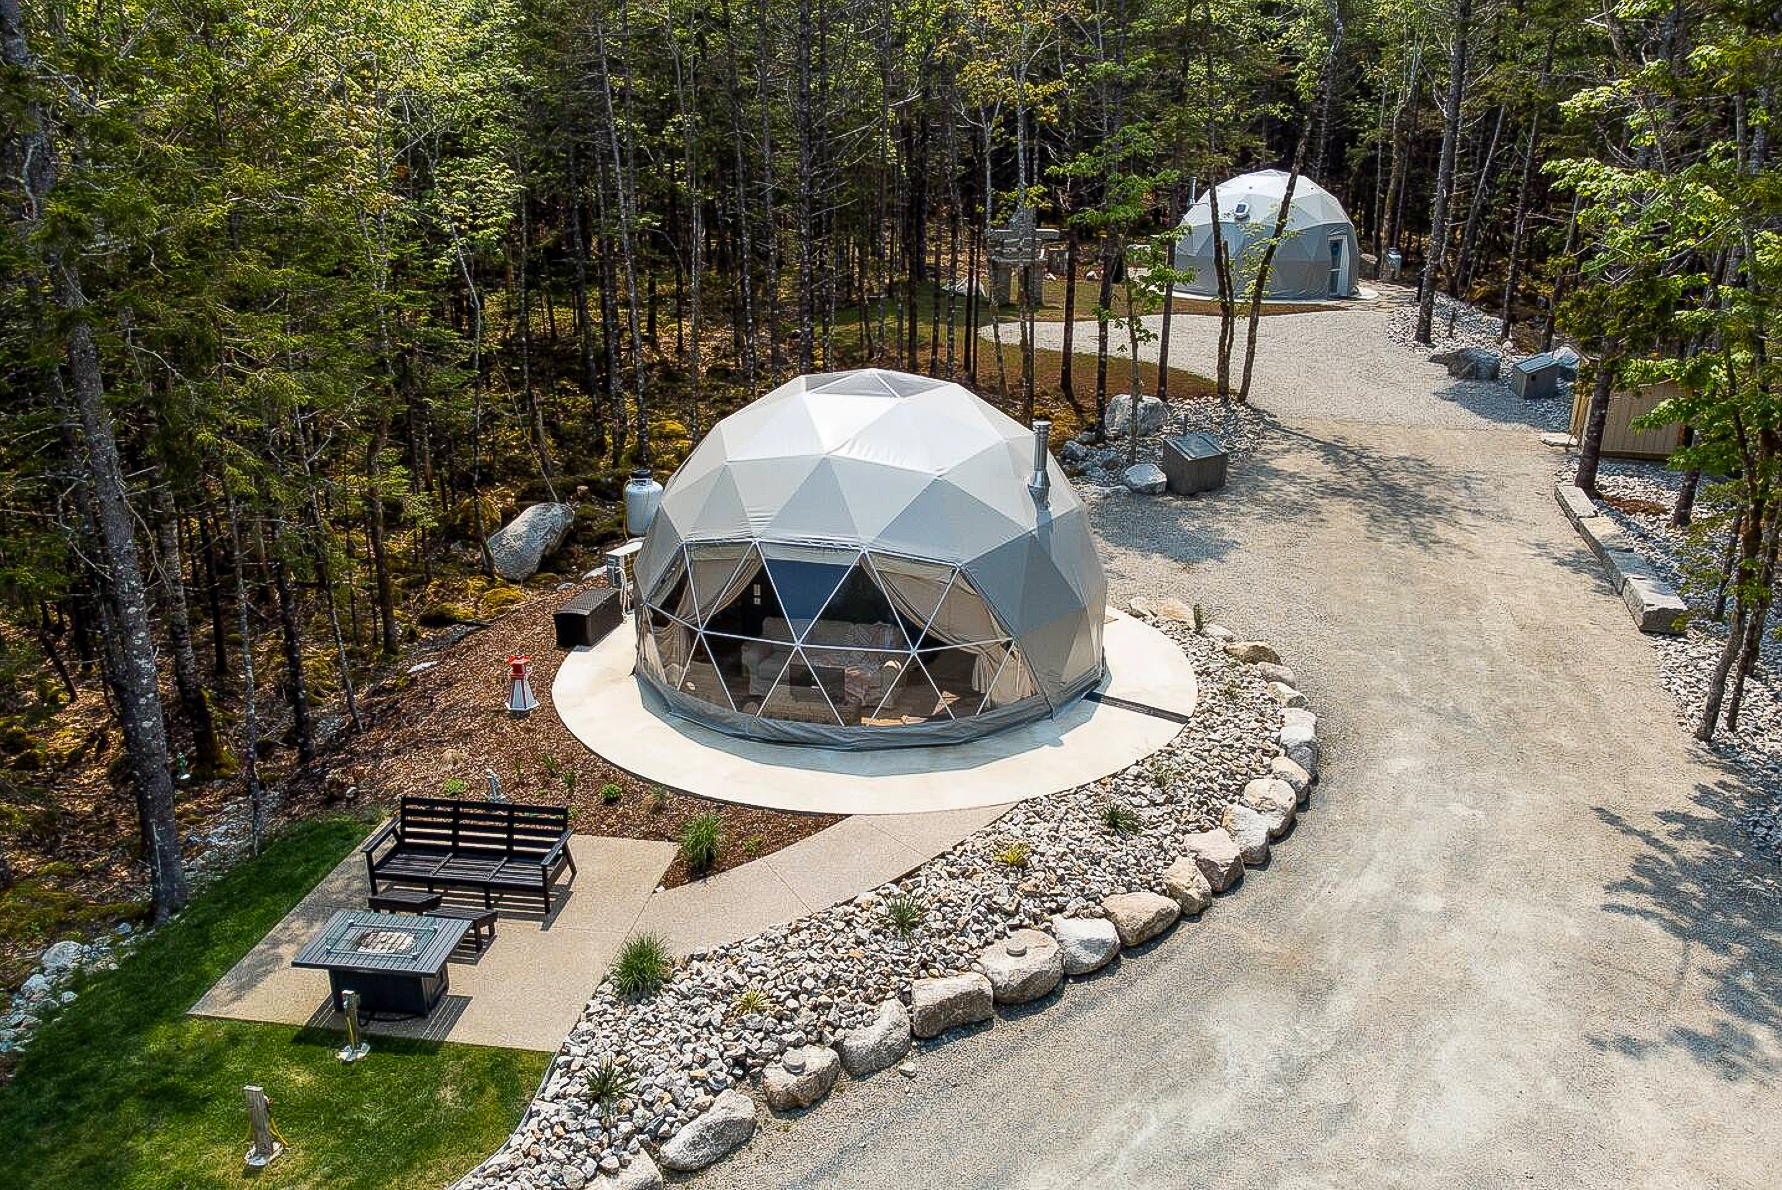 two geodesic domes on the campsite in forest